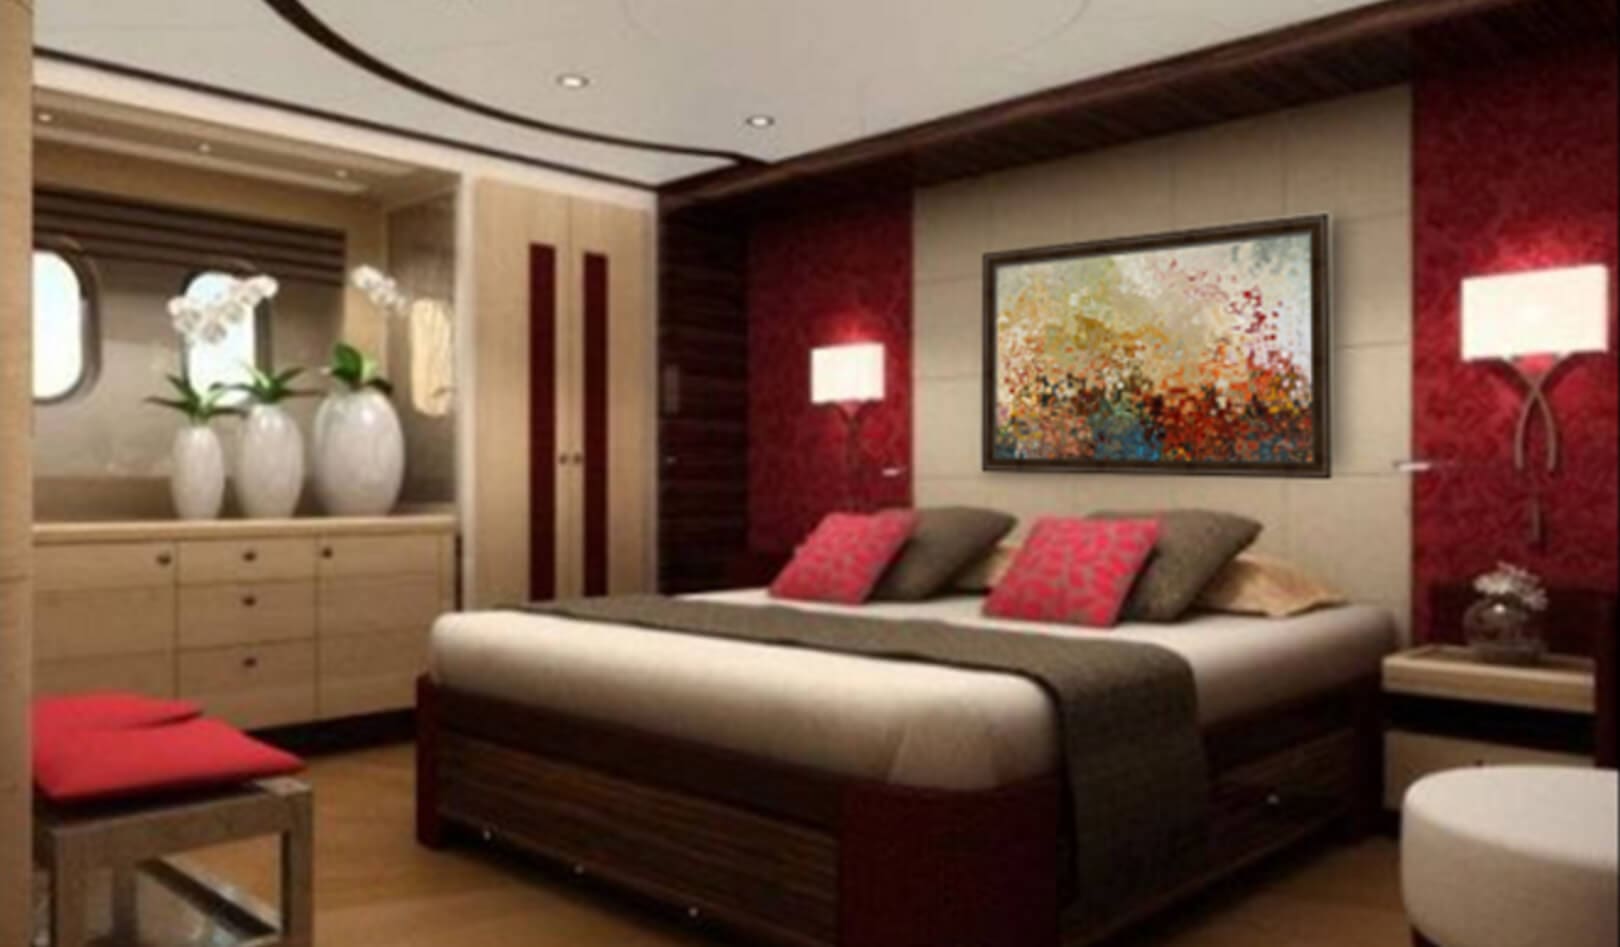 A picture of the brown and red theme bed room